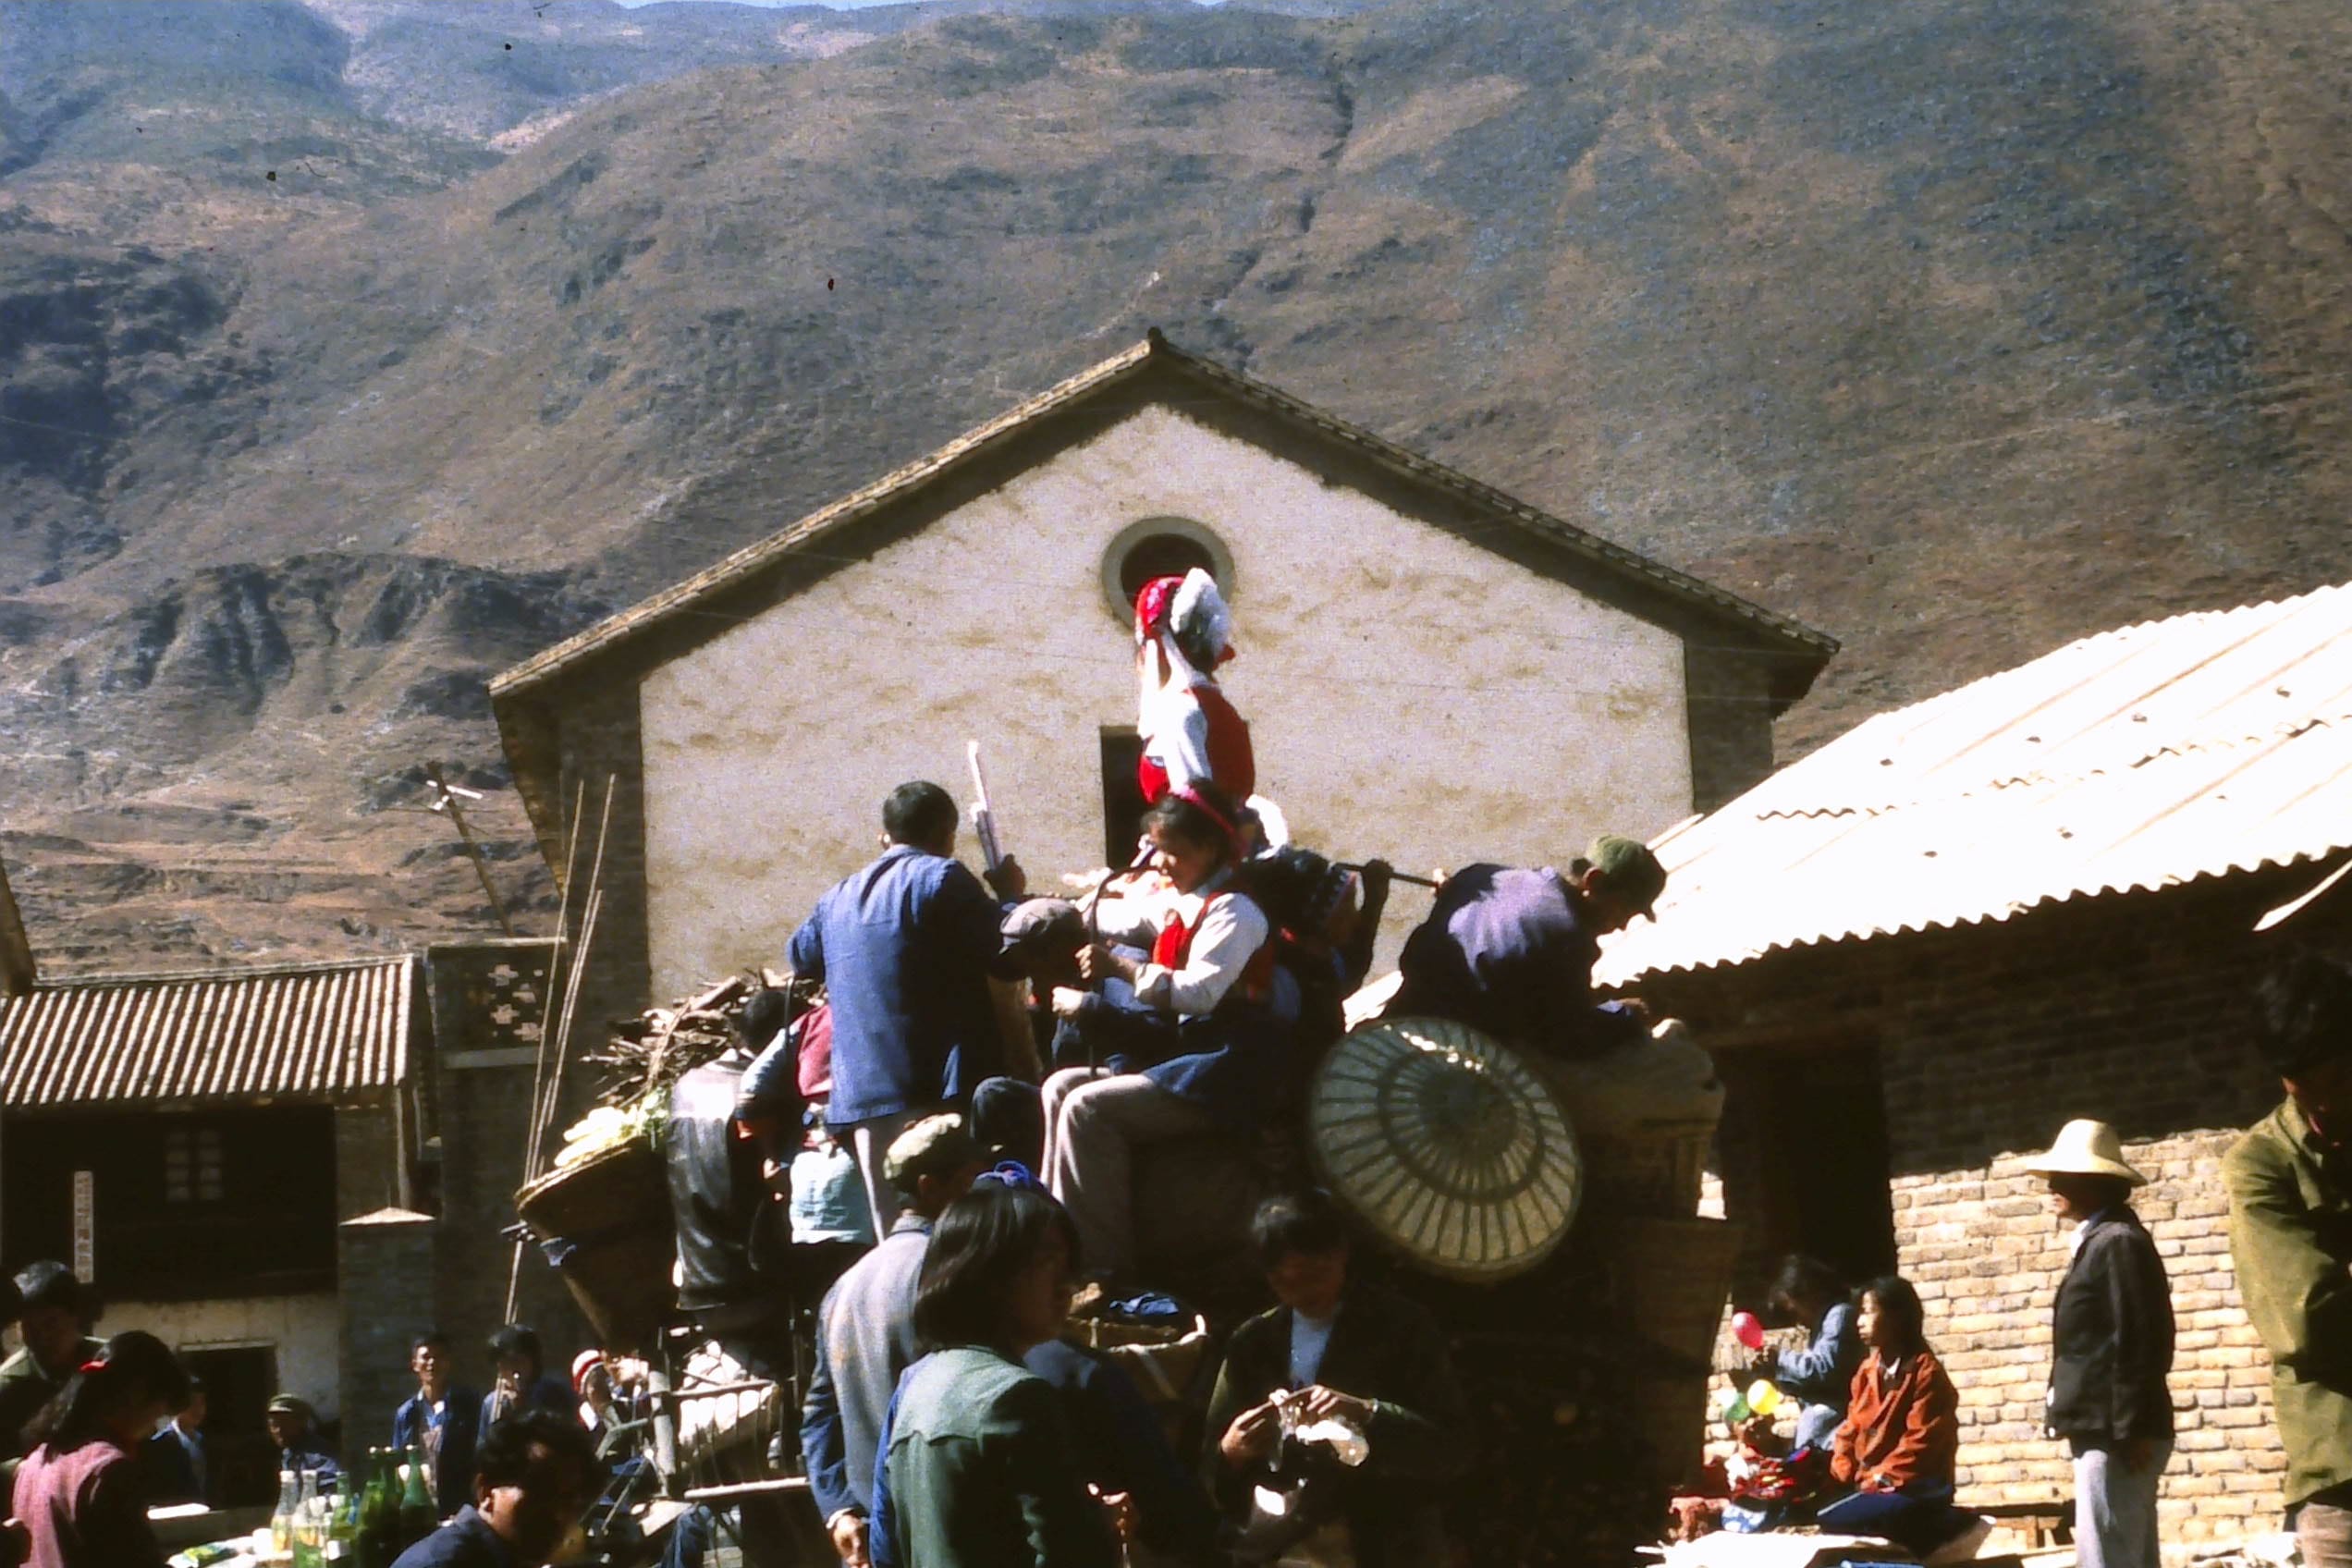 Open market in the mountains outside Dali.